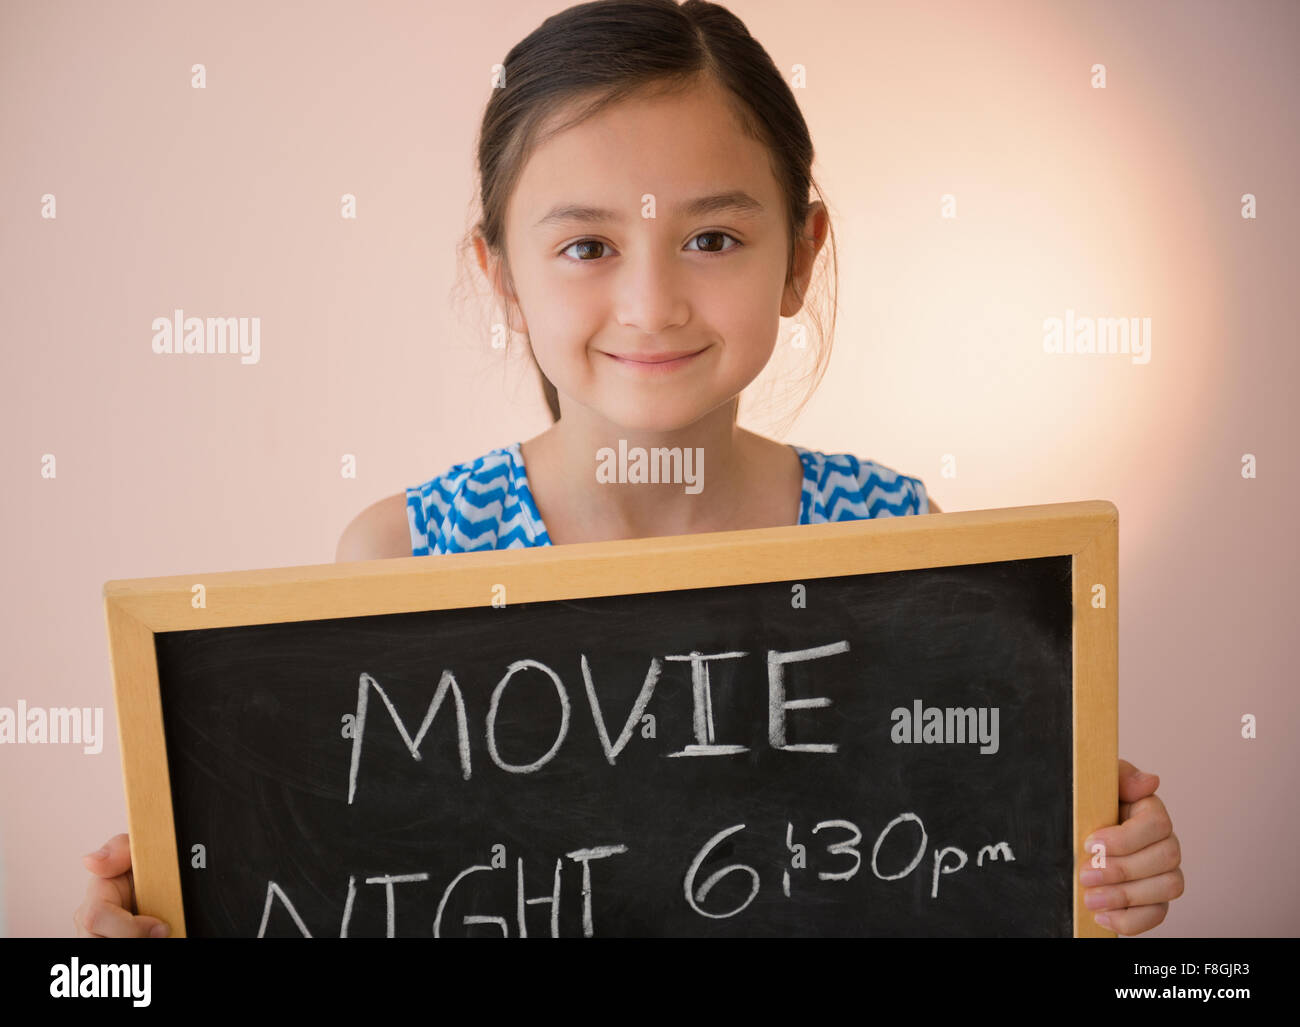 Girl holding tableau Movie night sign Banque D'Images